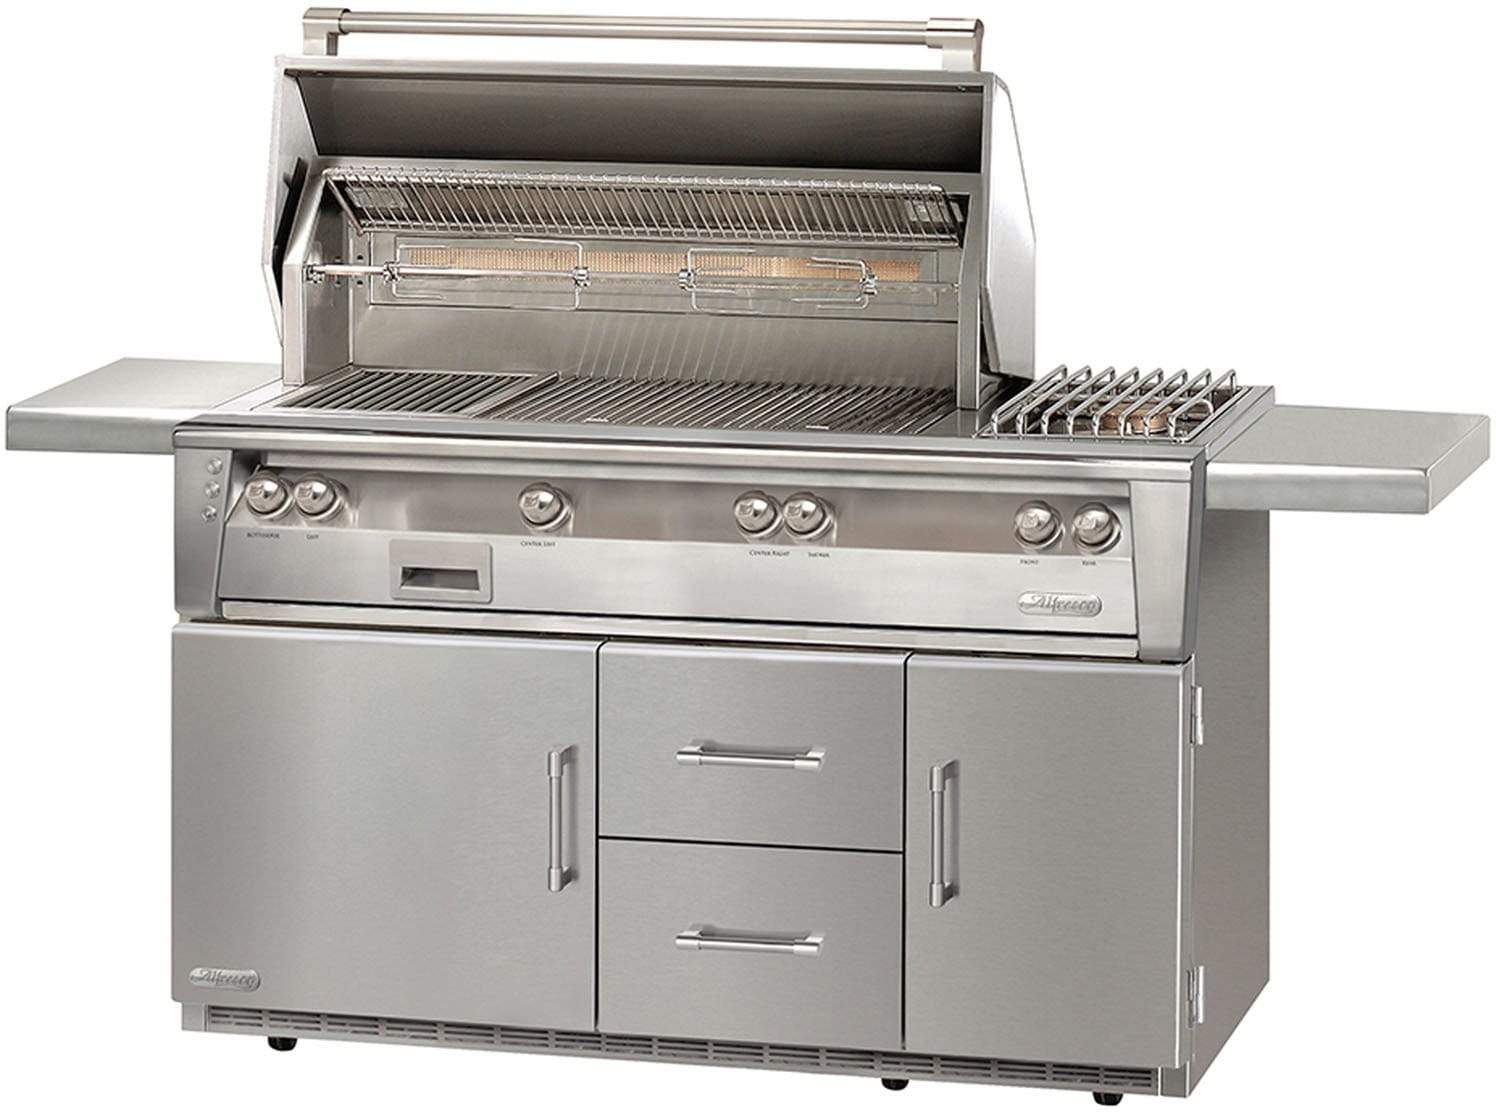 Alfresco Grills Natural Gas Alfresco 56 Inch Grill with Grilling Surface, Three&nbsp; Main Burners, Side Burner, Integrated Rotisserie, Smoker and Herb Infuser System, 3-Position Warming Rack, Halogen Lighting and Refrigerated Cart:&nbsp;ALXE-56R-LP /&nbsp;ALXE-56R-NG